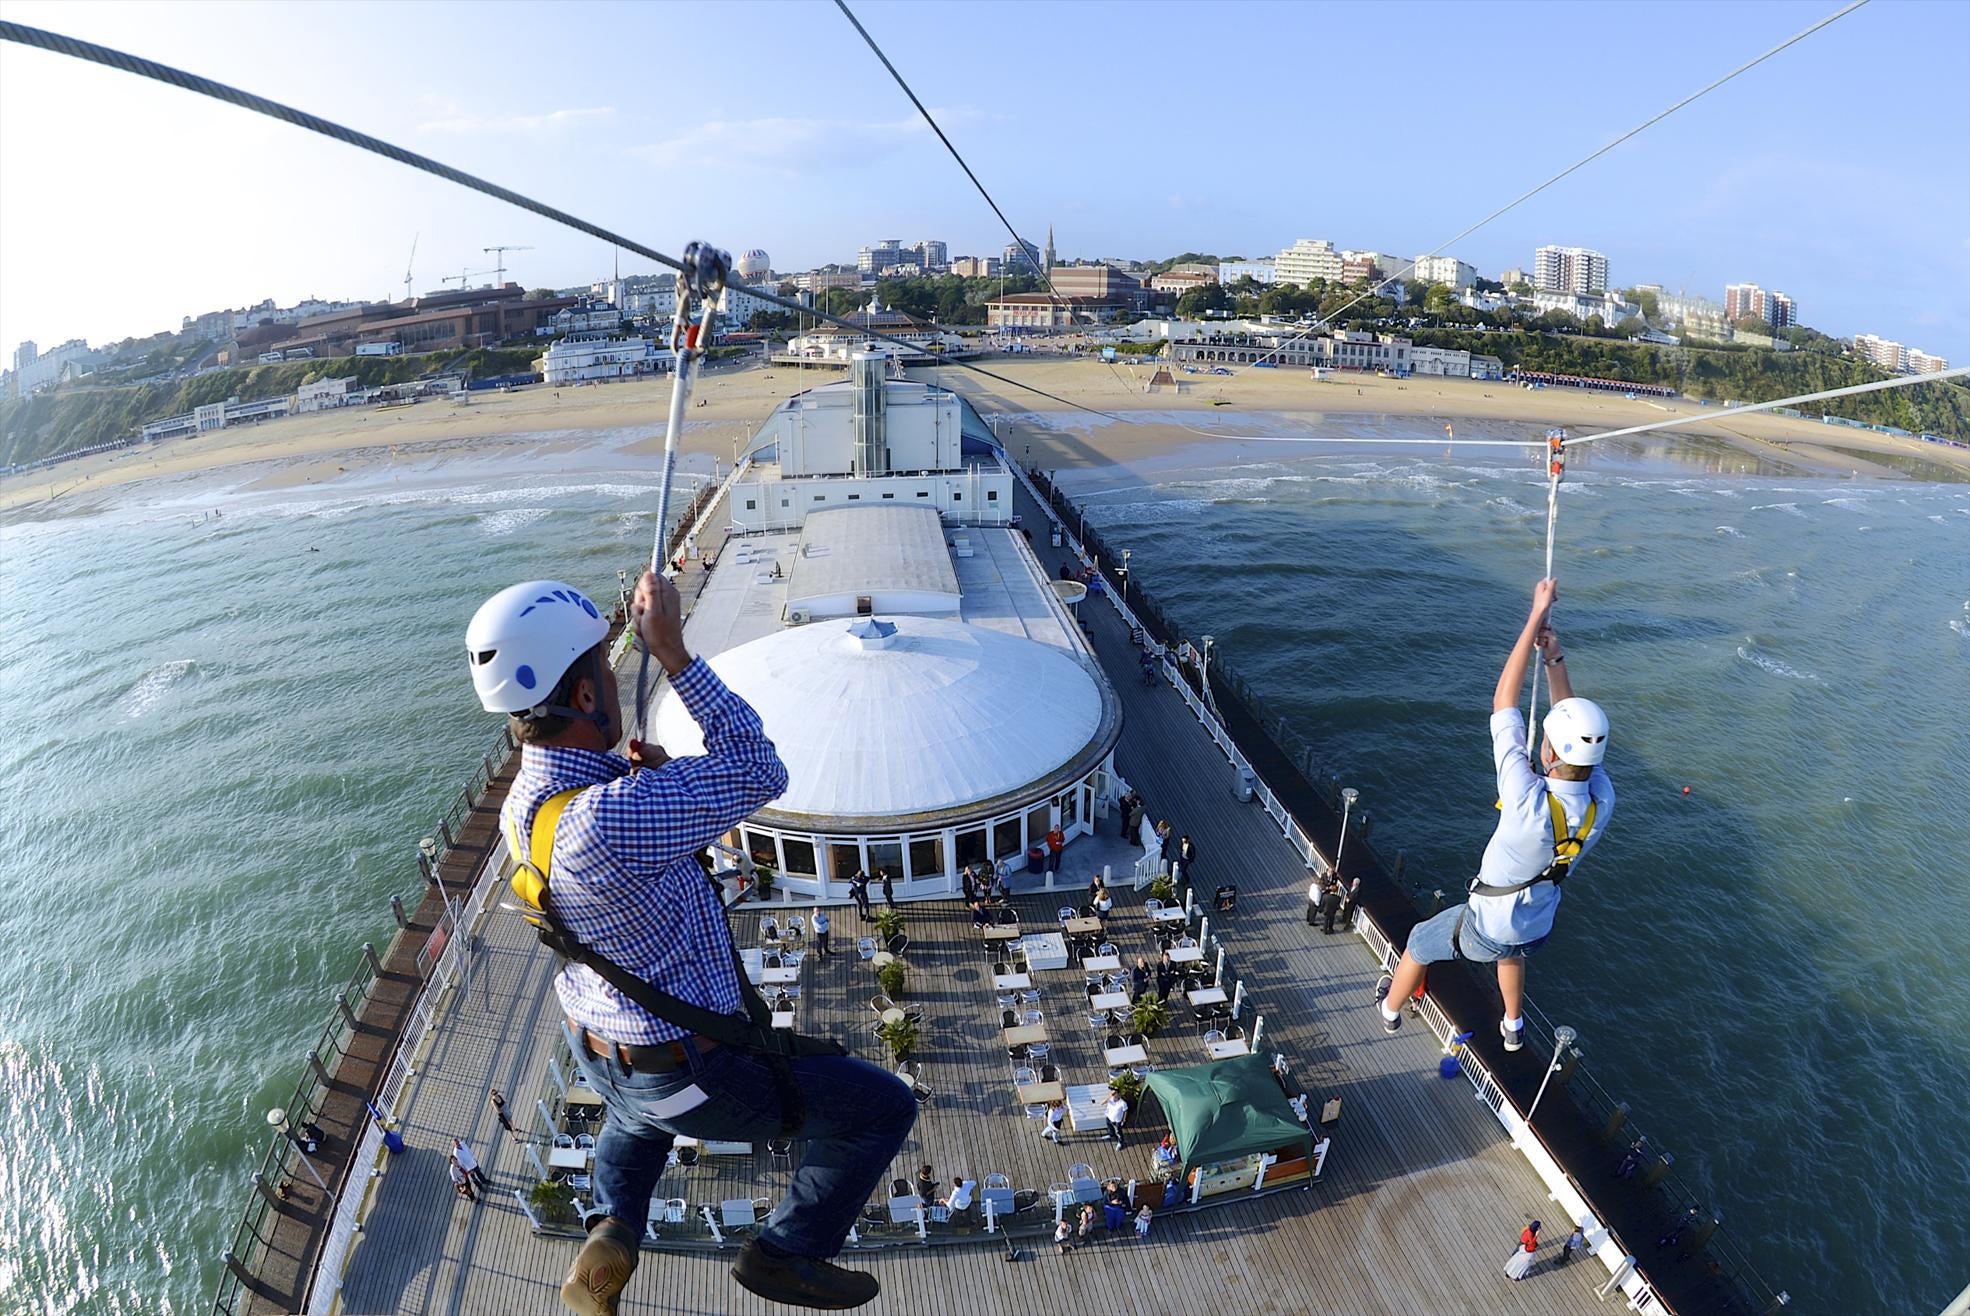 Try the world's first pier-to-shore zip wire